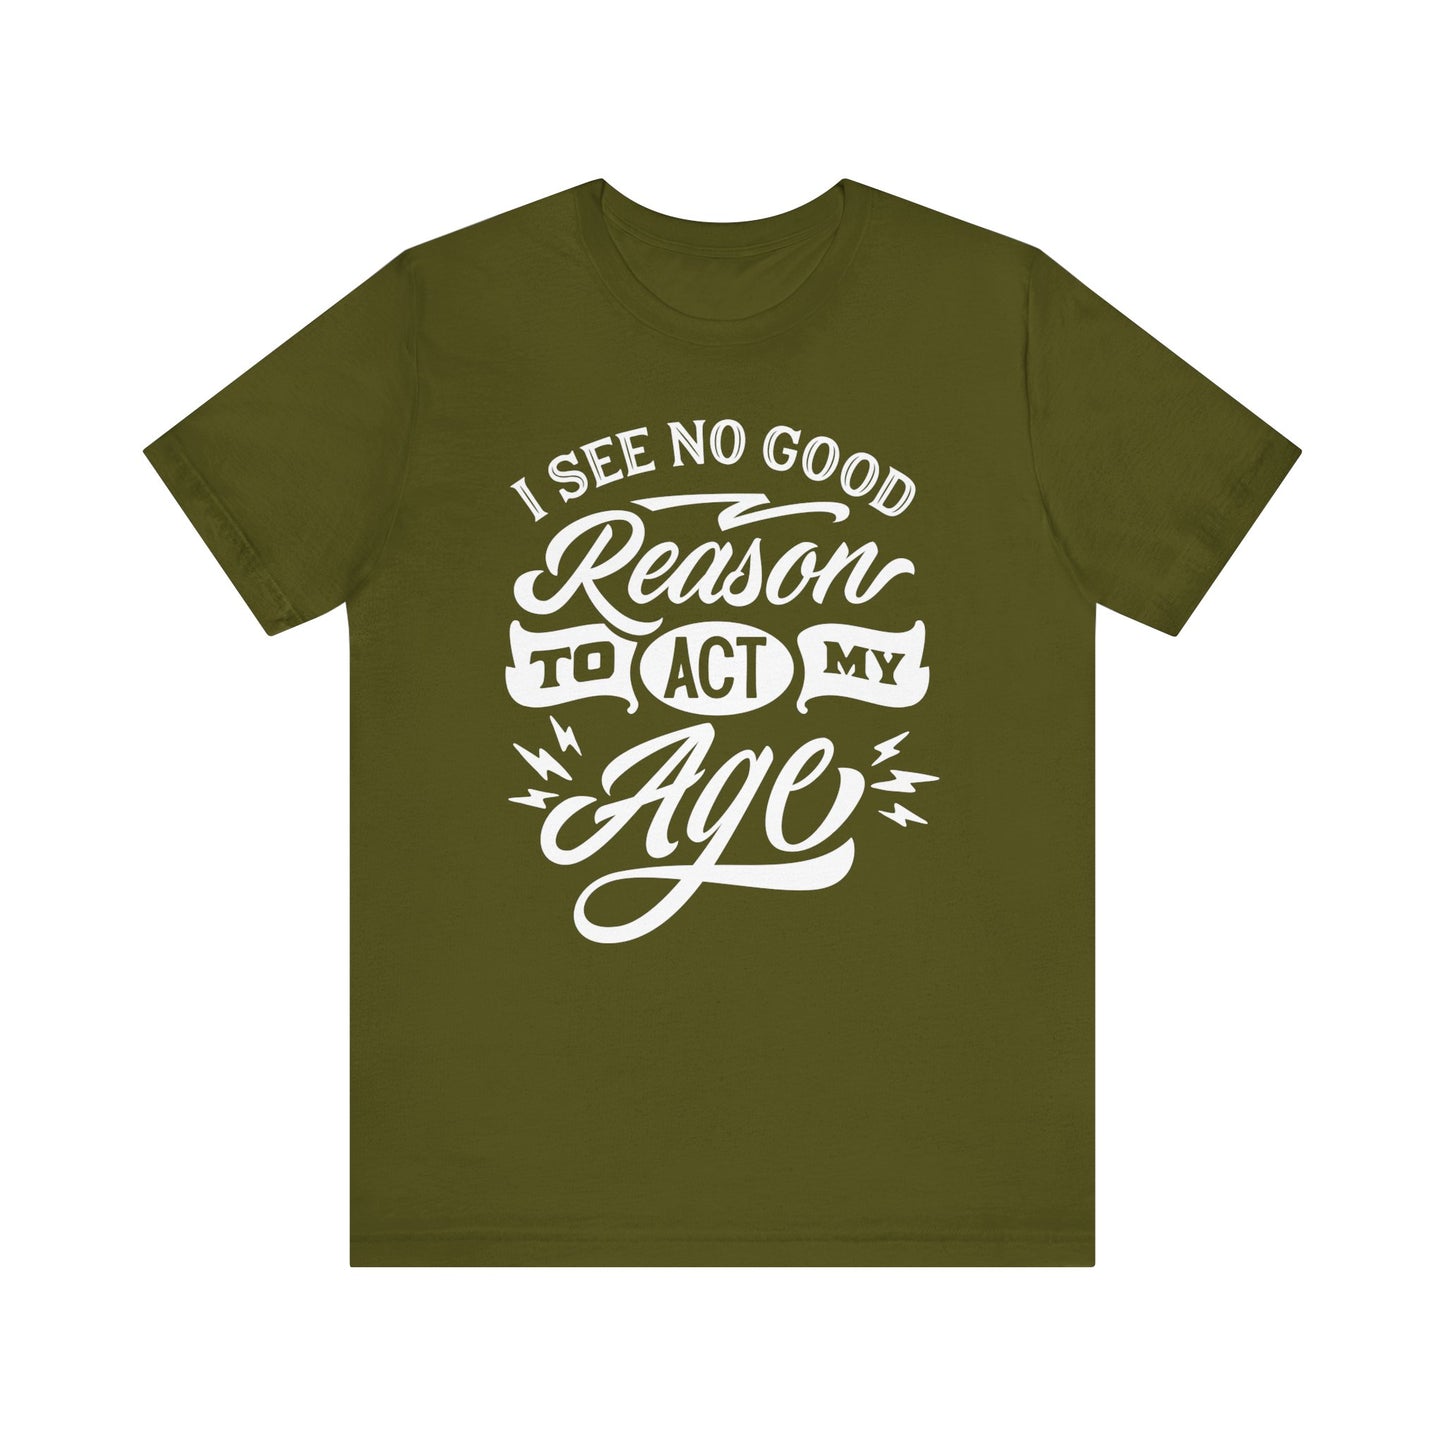 Birthday T-Shirt For Getting older T Shirt For Funny Aging TShirt For Old Fart Gift